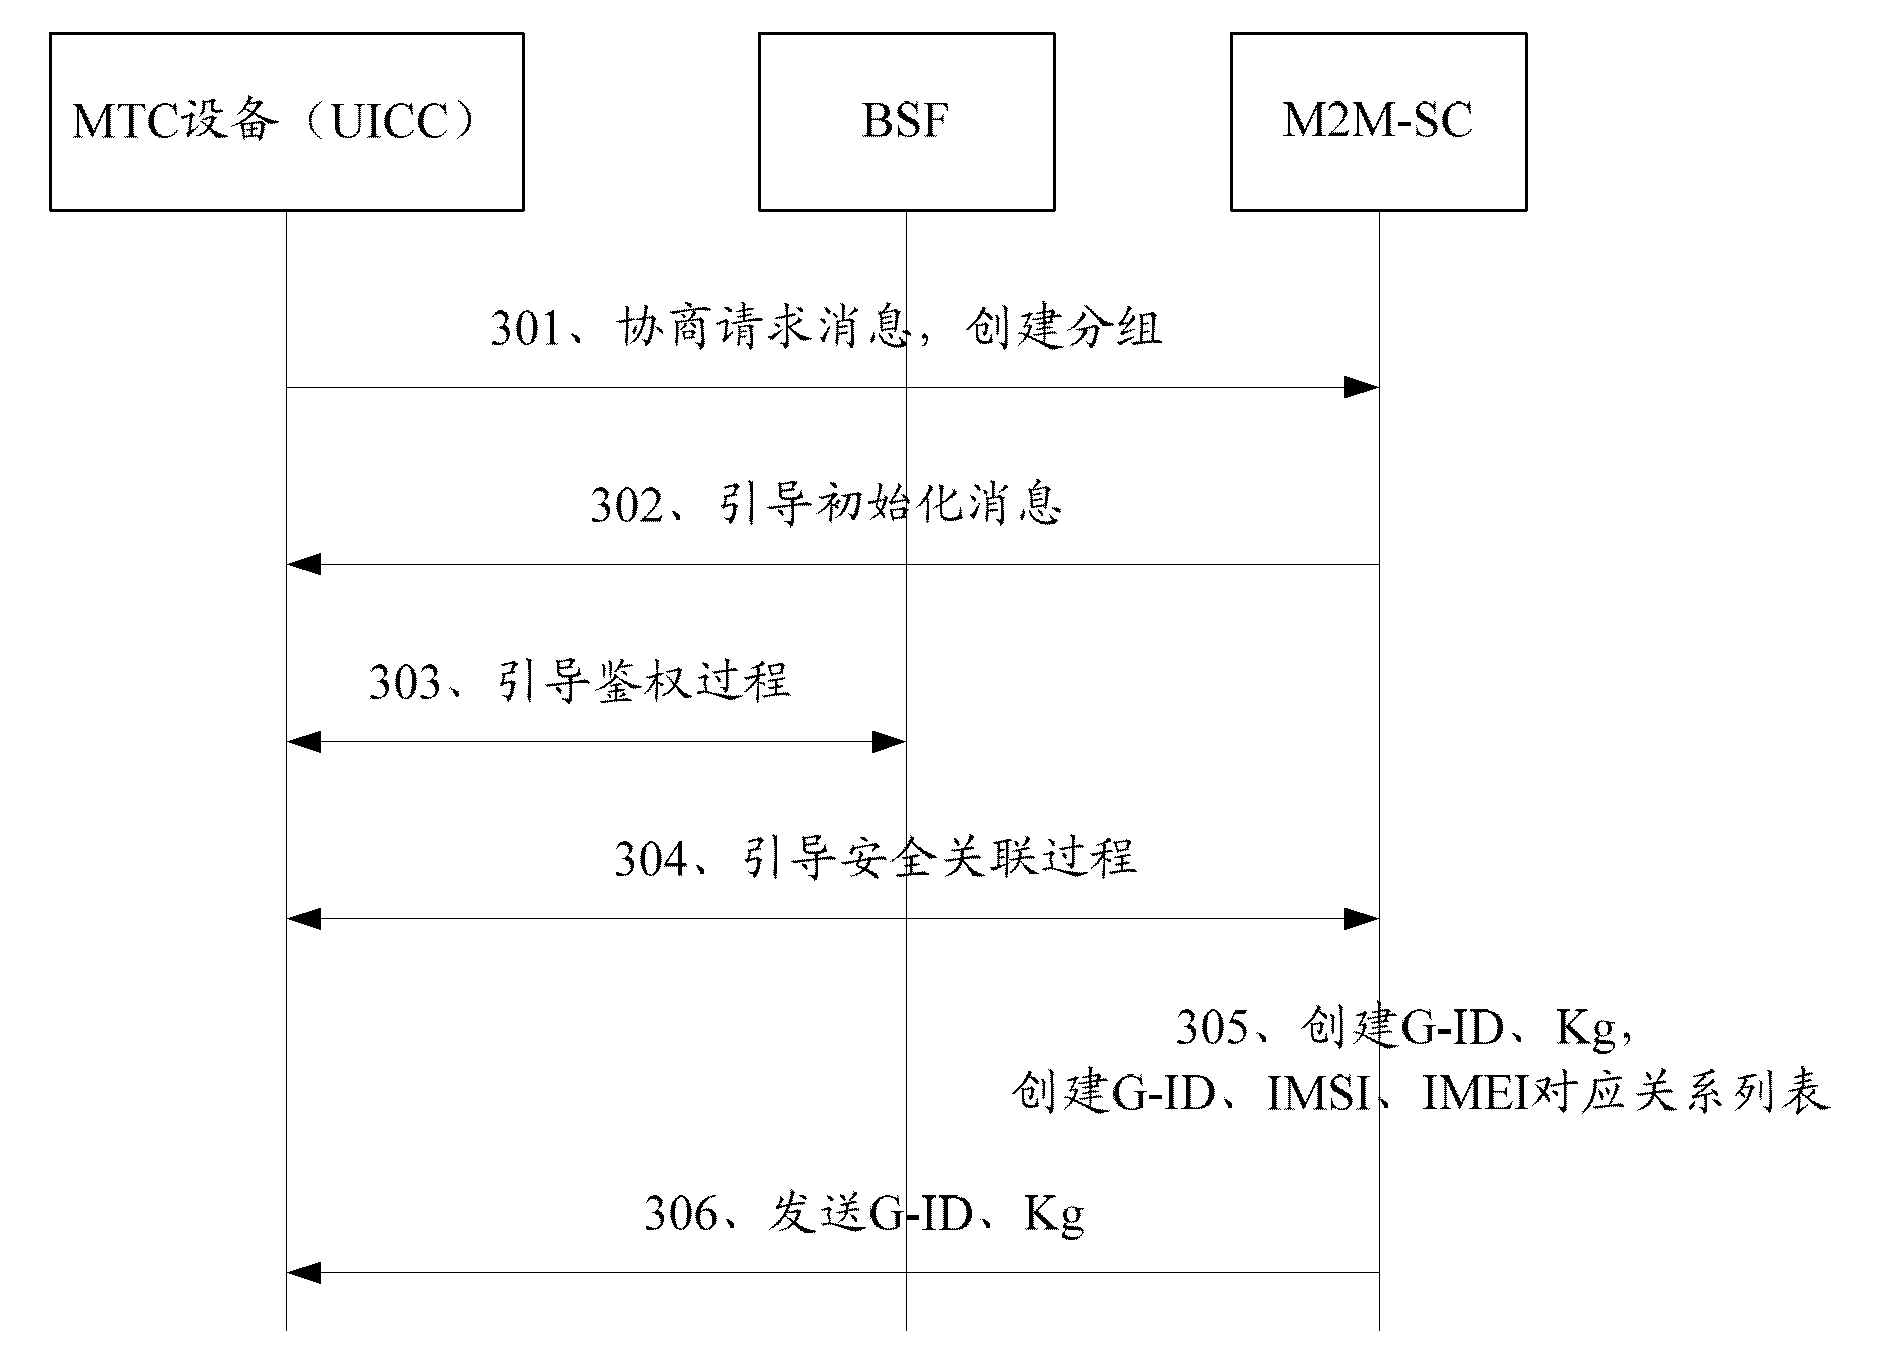 Method and system for managing machine type communication (MTC) equipment based on generic bootstrapping architecture (GBA) in grouping manner